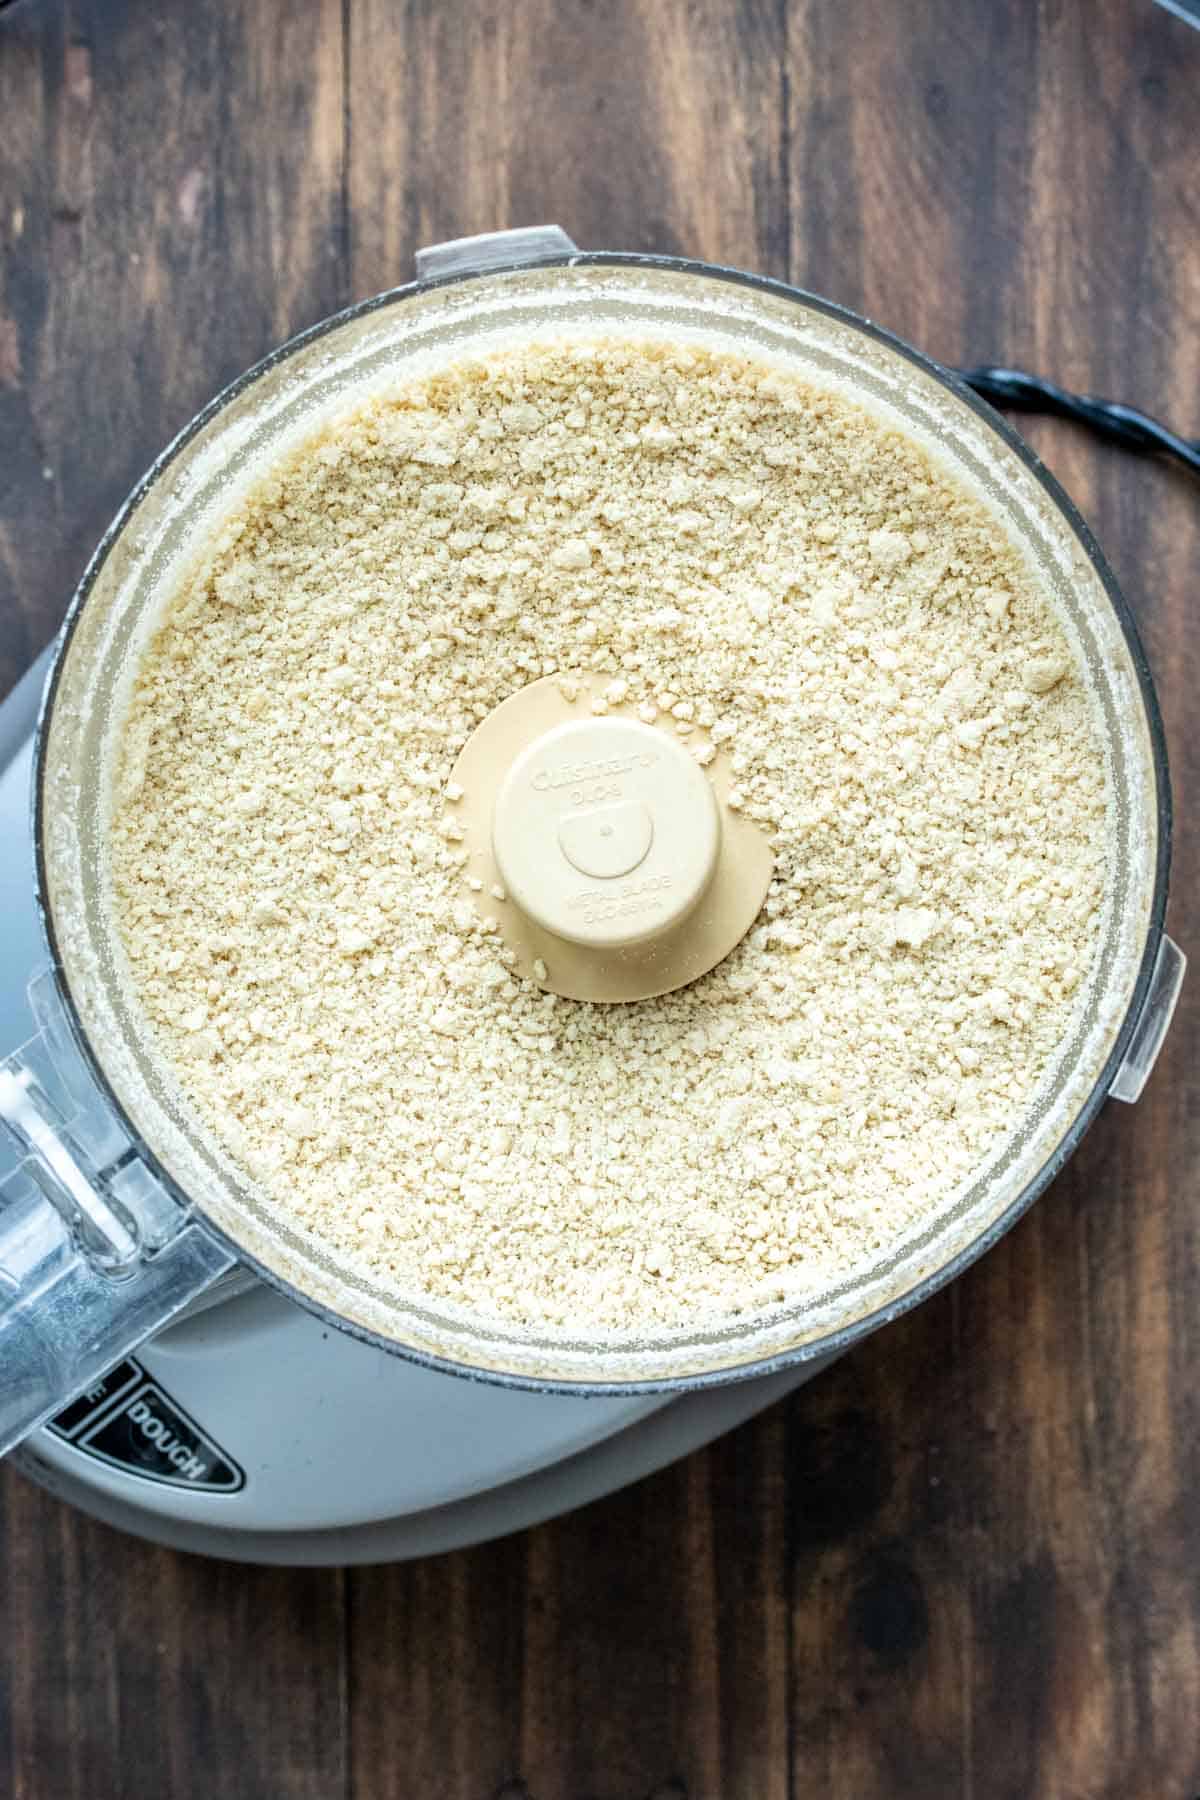 Pulsed cashews in a food processor being made into vegan Parmesan